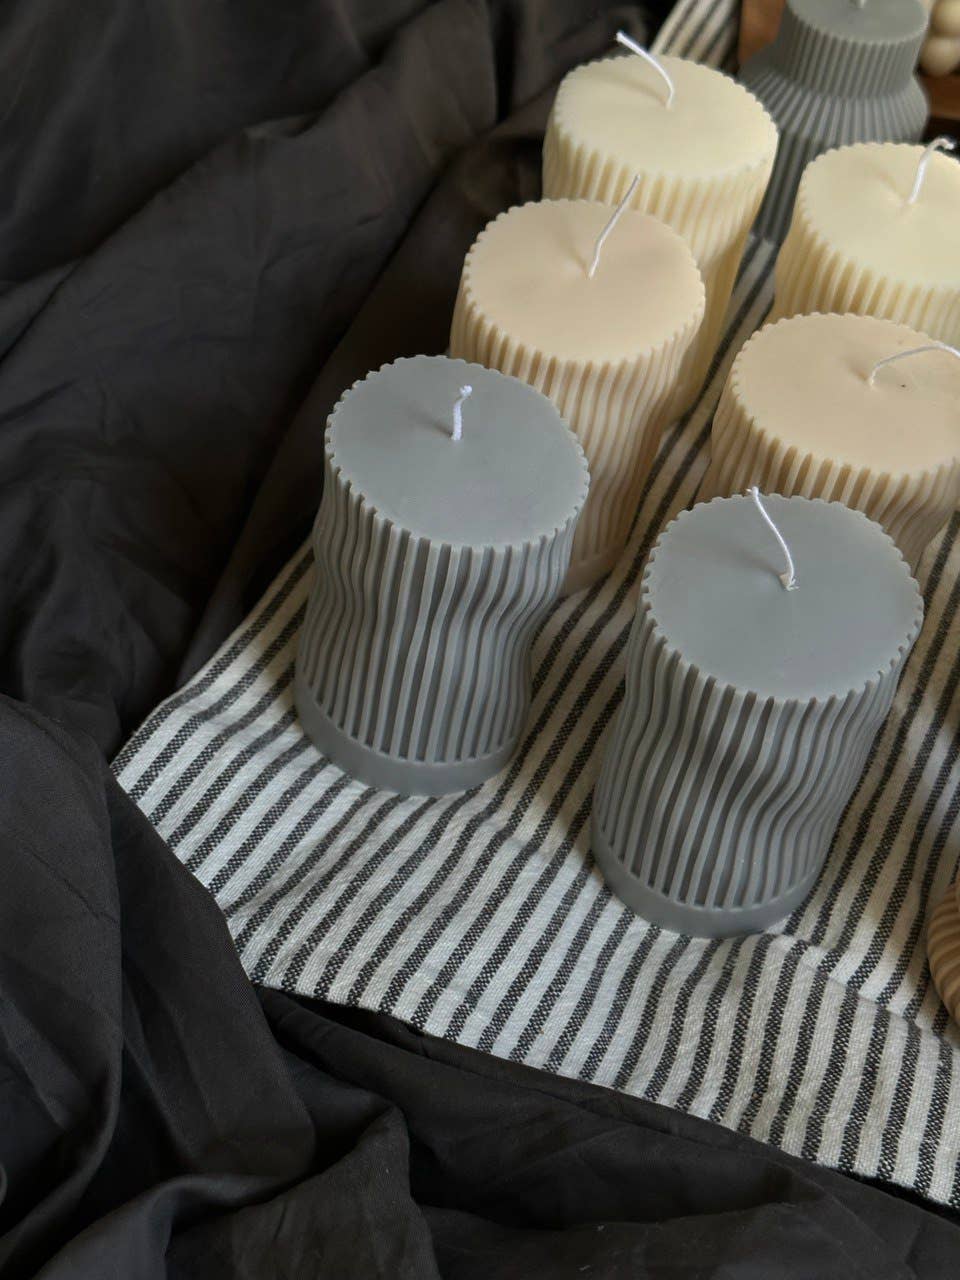 Check out the latest collections of Urban Crafter Candle Making